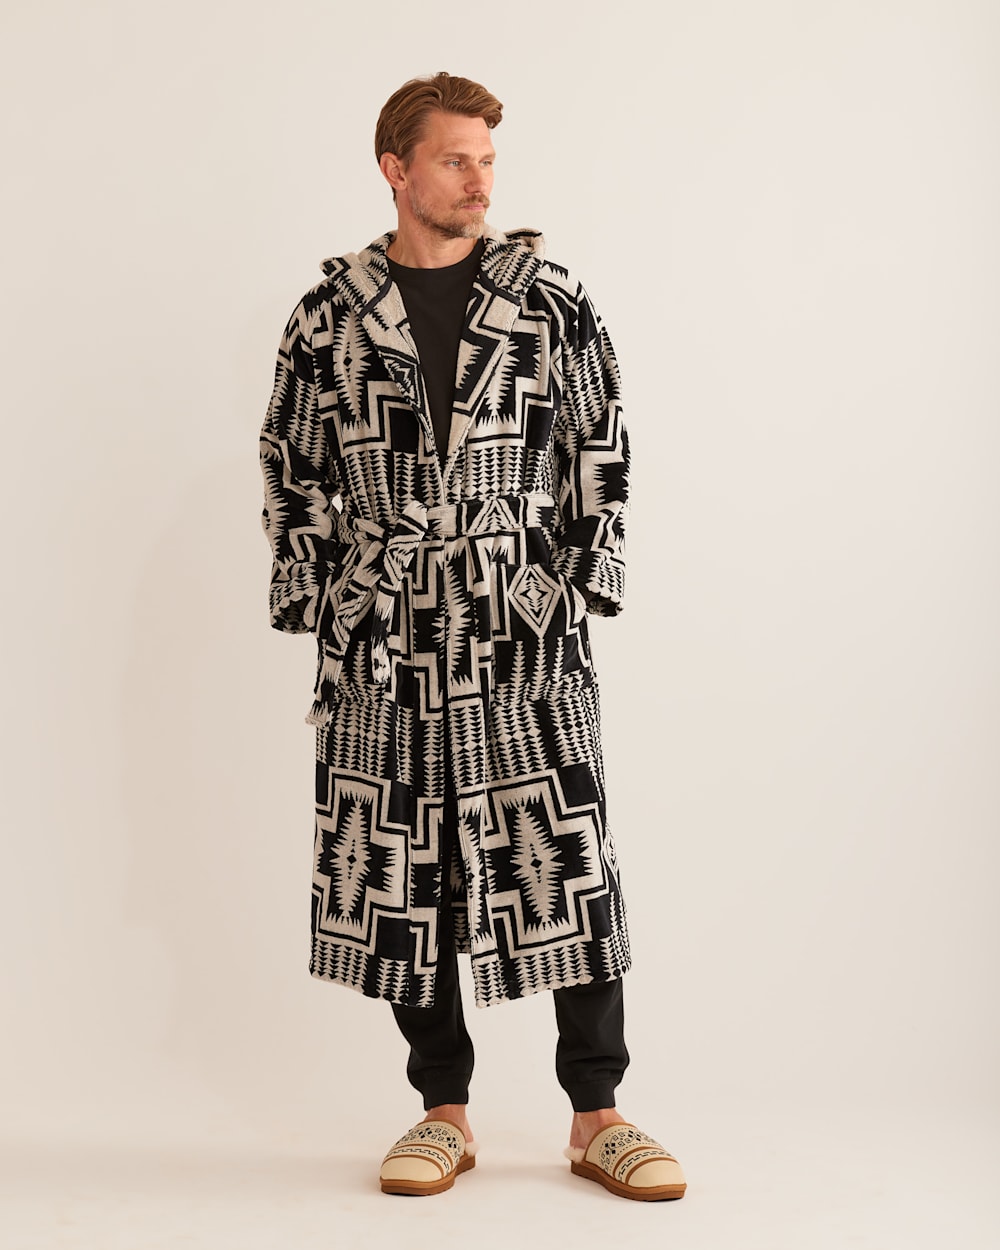 ALTERNATE VIEW OF UNISEX COTTON TERRY VELOUR ROBE IN BLACK/WHITE HARDING image number 5